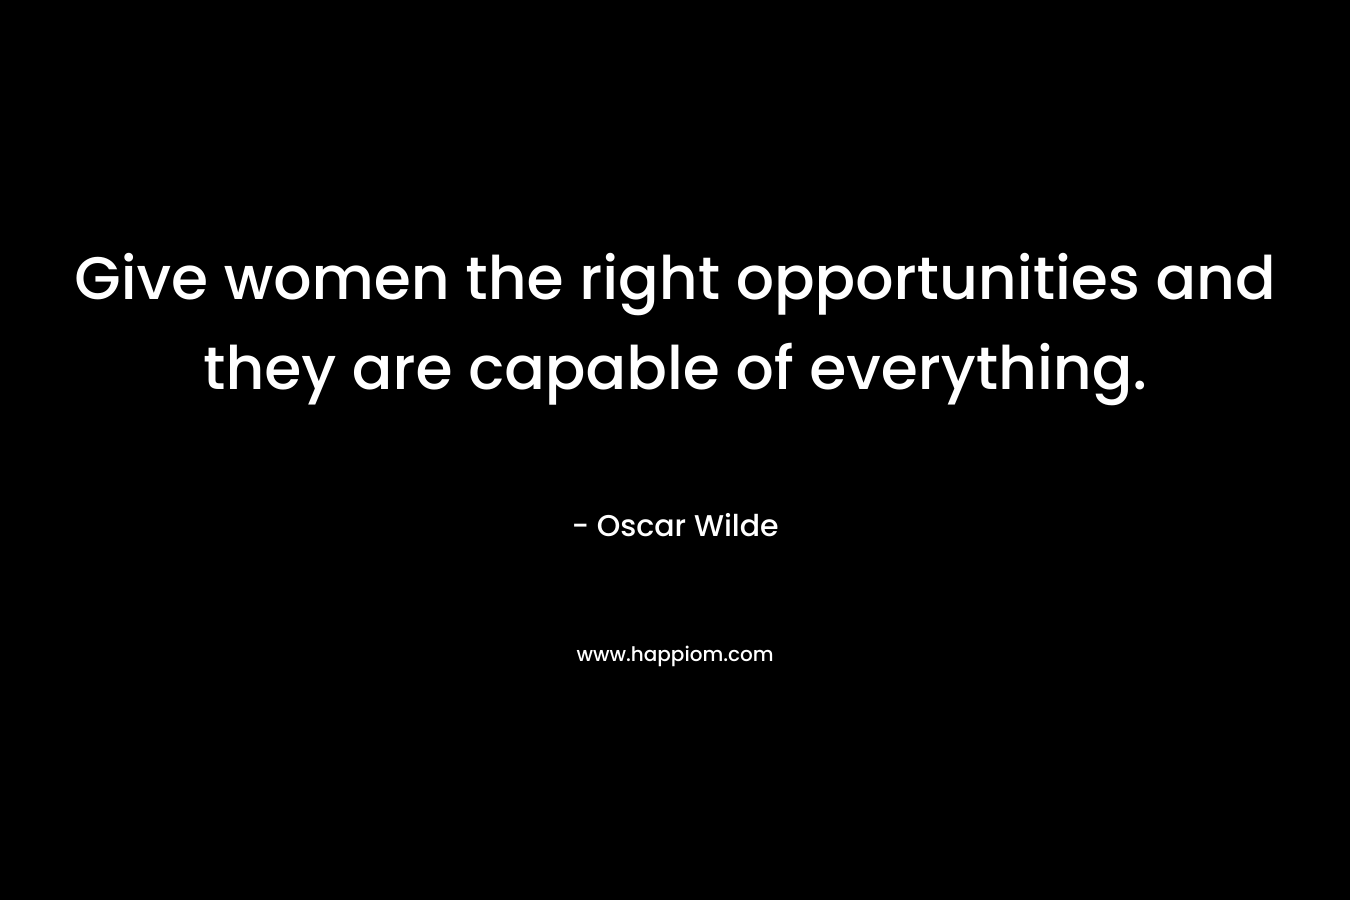 Give women the right opportunities and they are capable of everything.